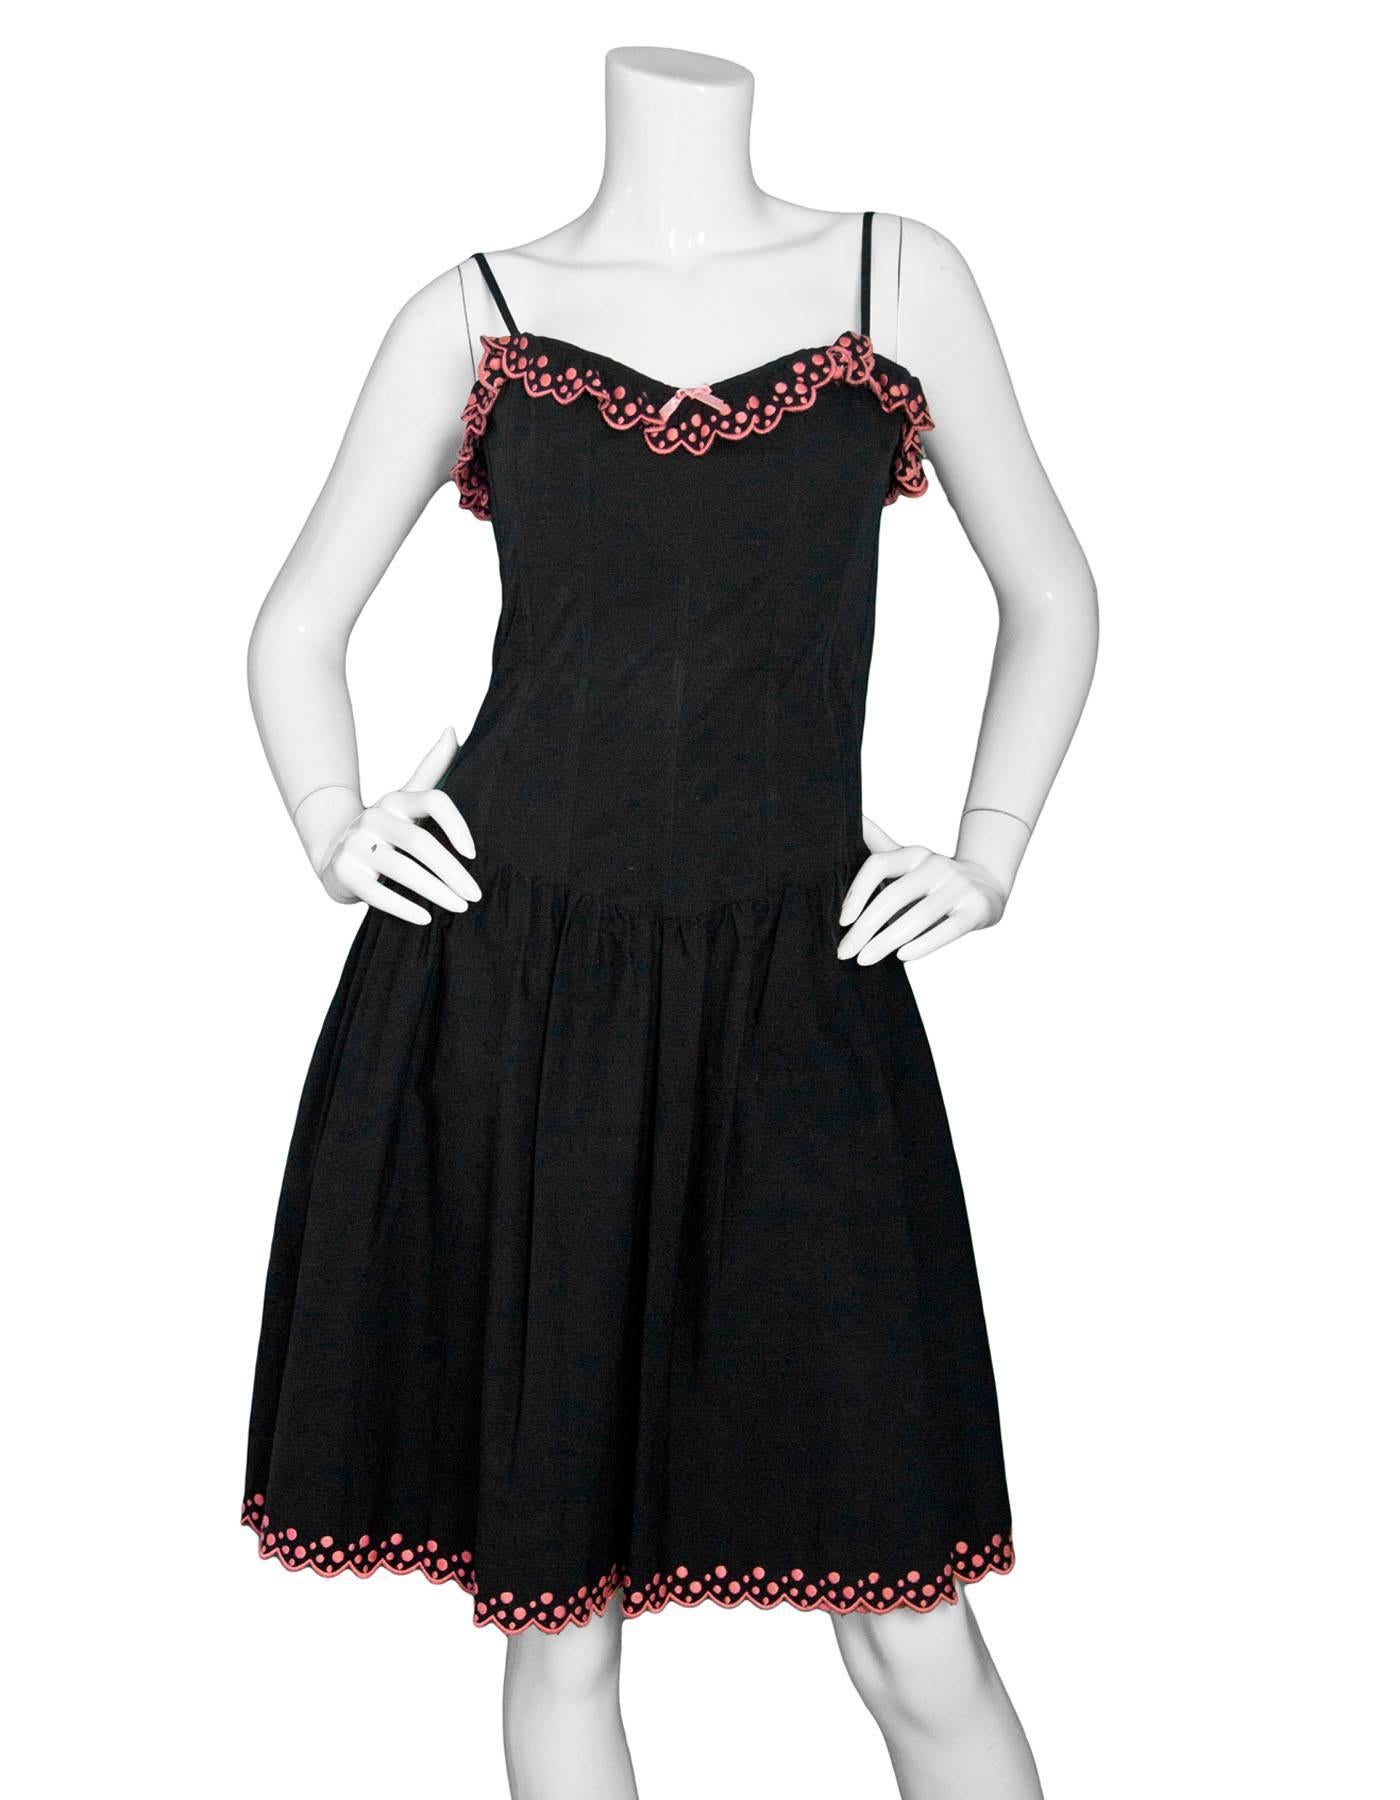 Betsey Johnson Black & Pink Ruffle Dress Sz 10

Features corset-style lace up back and soft boning at bodice

Made In: China
Color: Black, pink
Composition: 98% cotton, 2% spandex
Lining: Black textile
Closure/Opening: Side zip closure
Overall